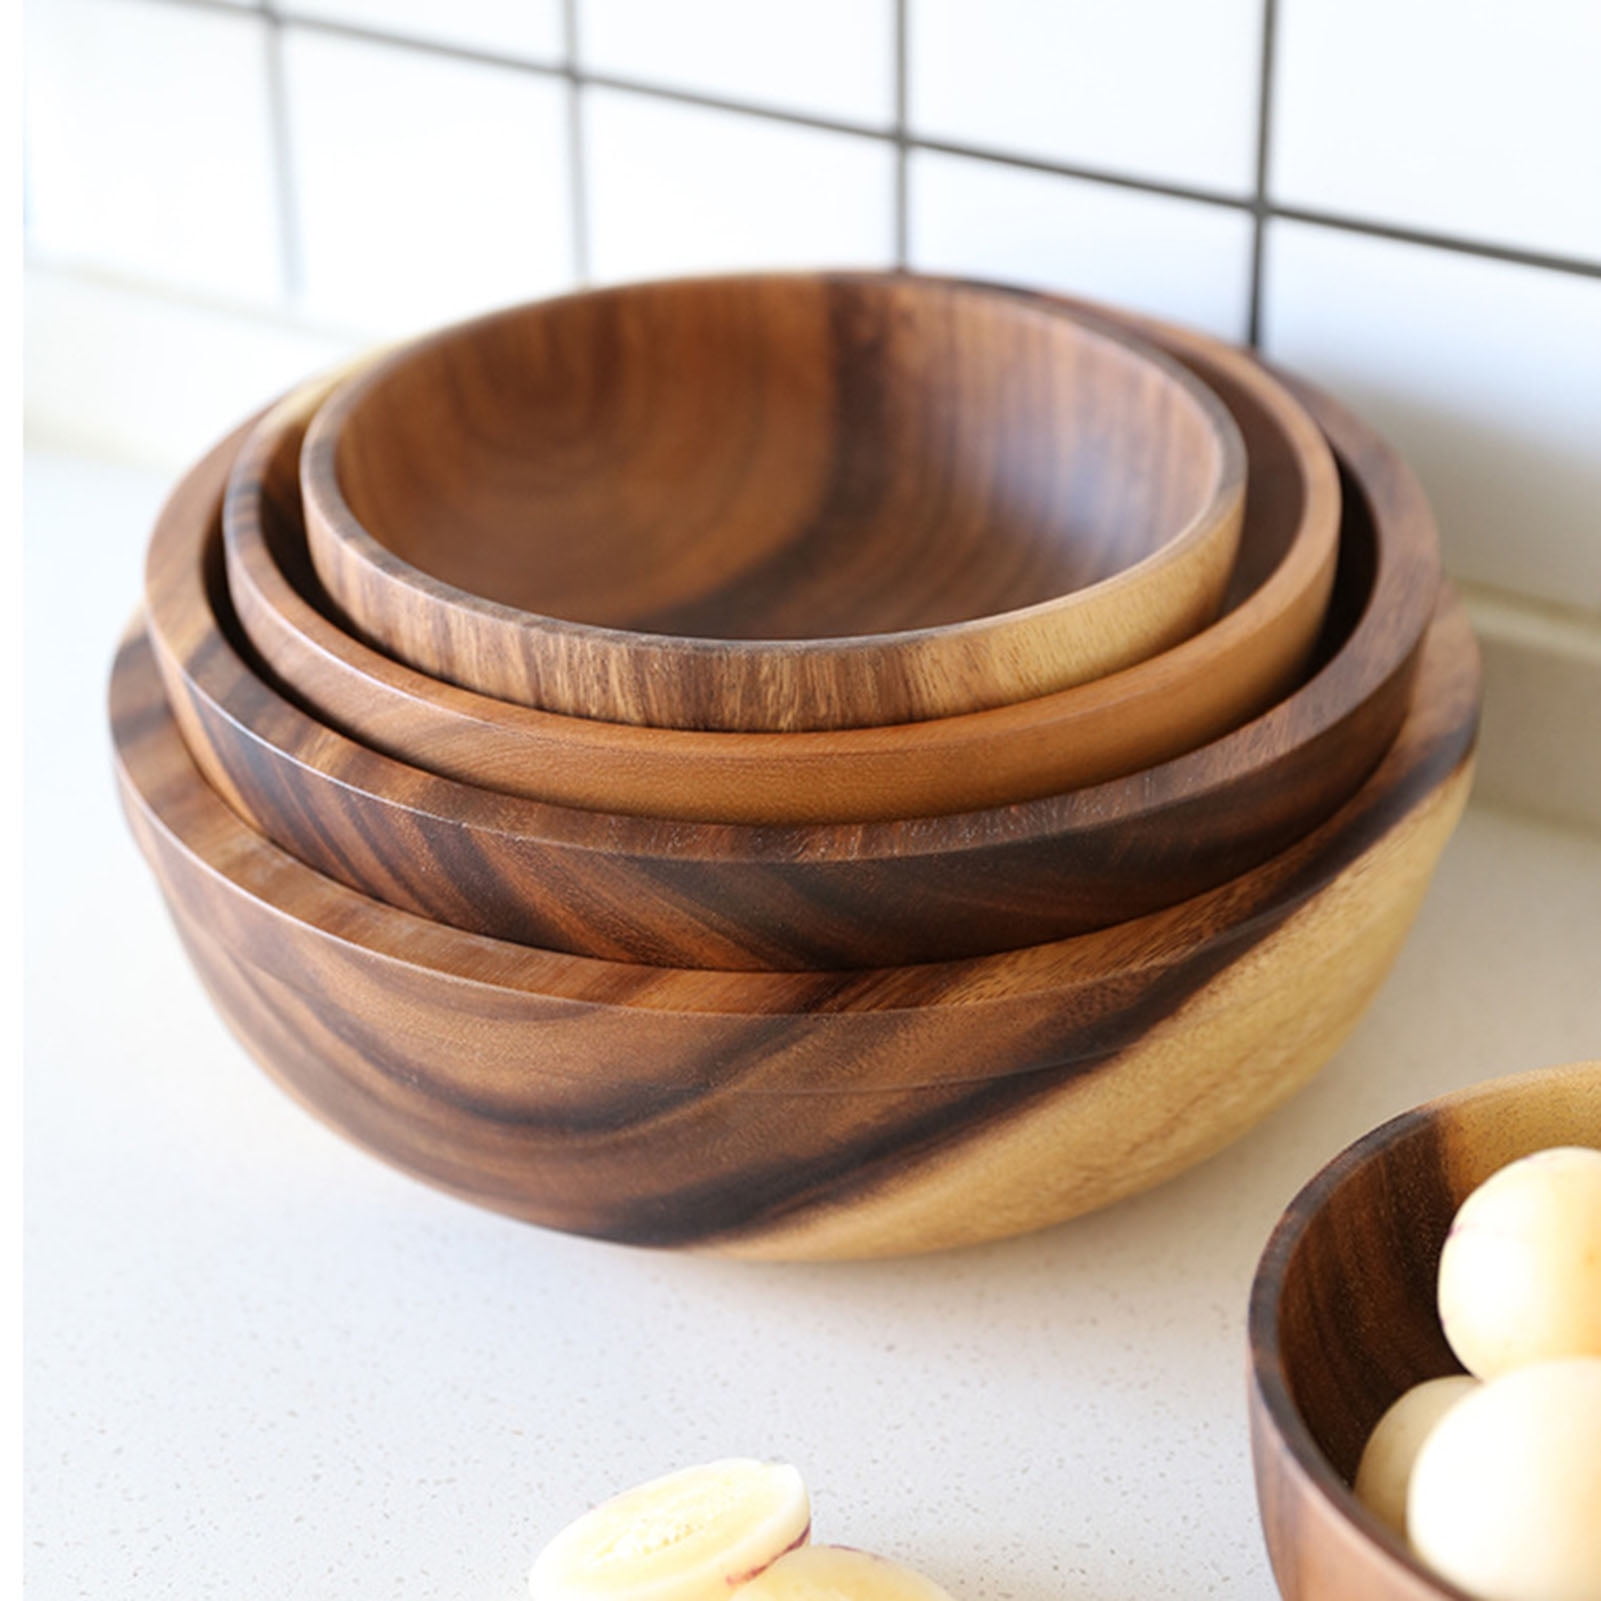 ZOME Practical Coconut Shell Rice Bowl Salad Bowl Tableware Bowls 